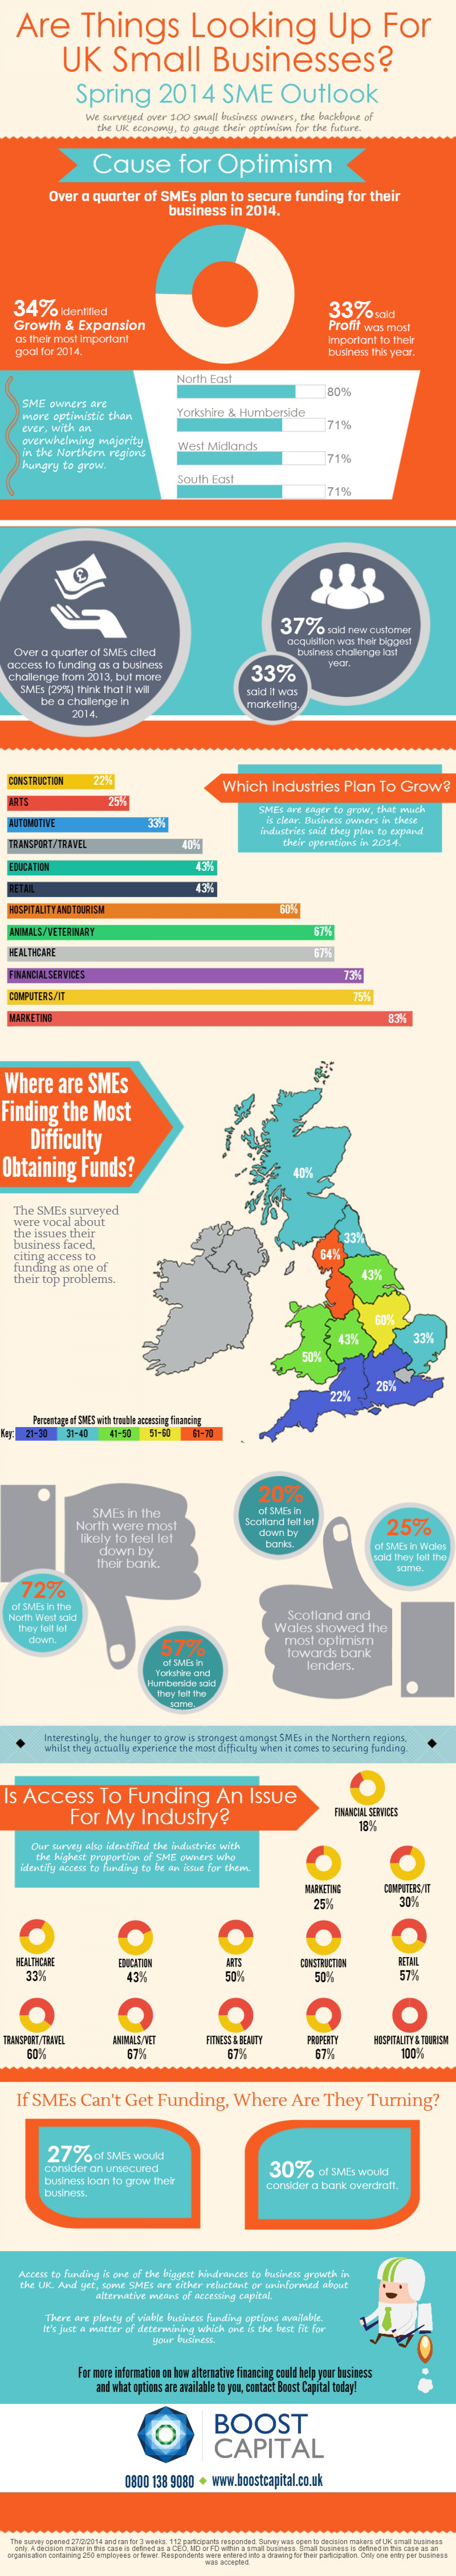 Business Outlook for UK SMEs Infographic